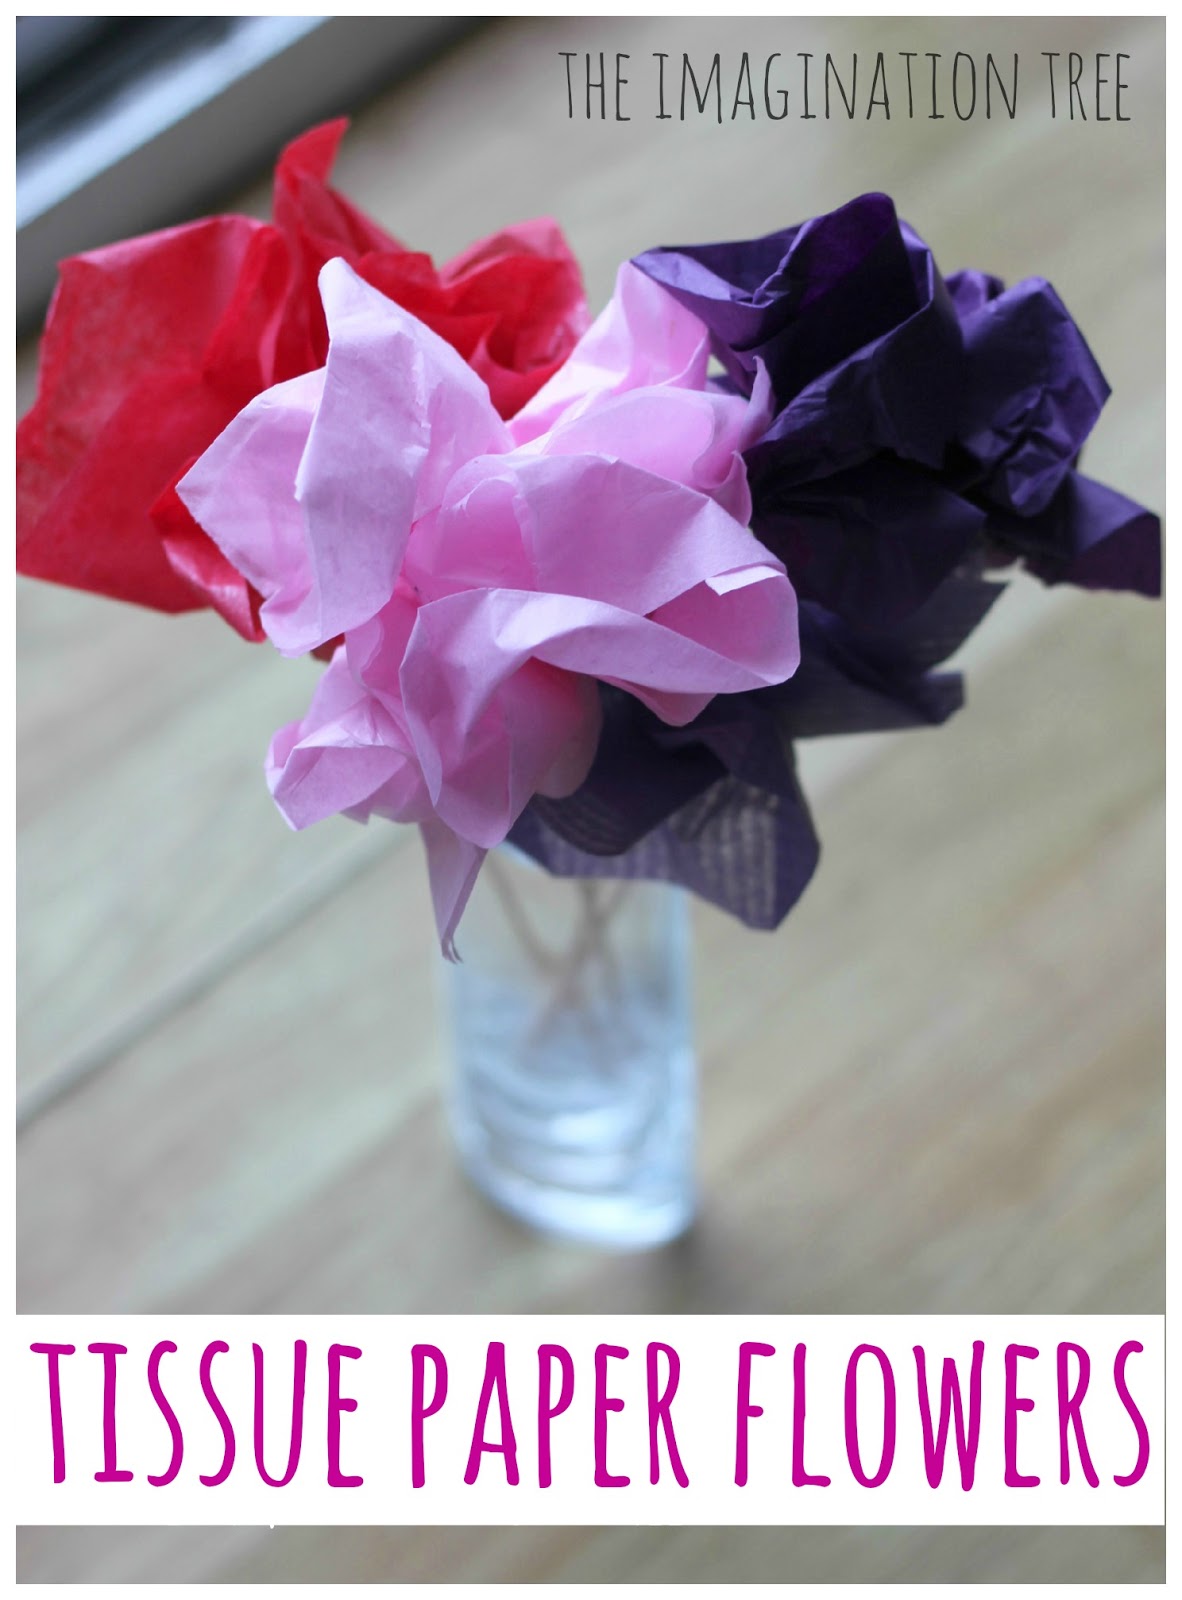 Tissue Paper Flowers - The Imagination Tree